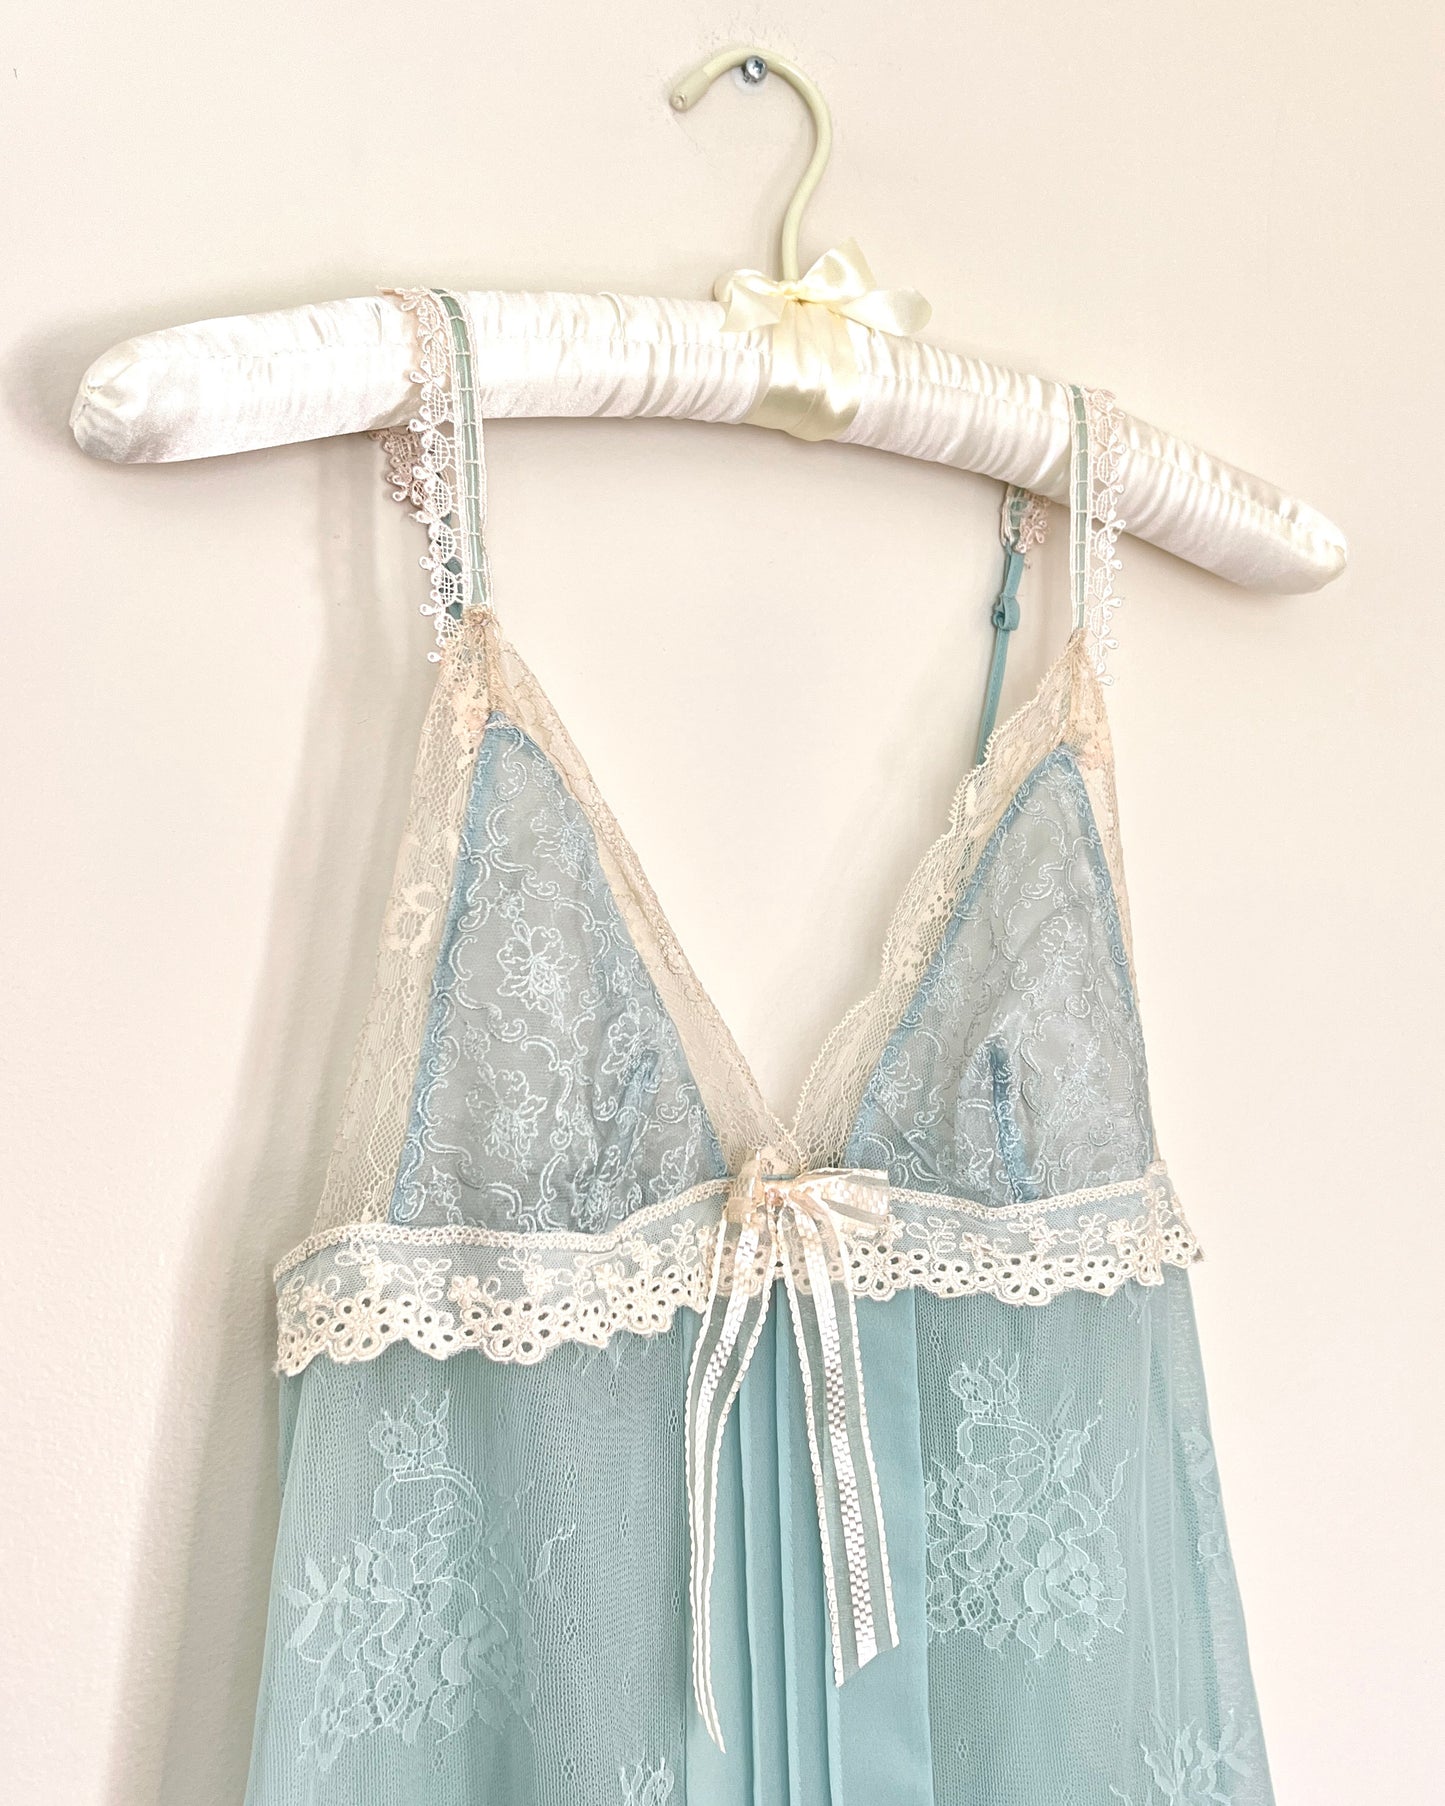 Fairycore Sheer Floral Embroidery Babydoll Slip featuring White Lace Lining